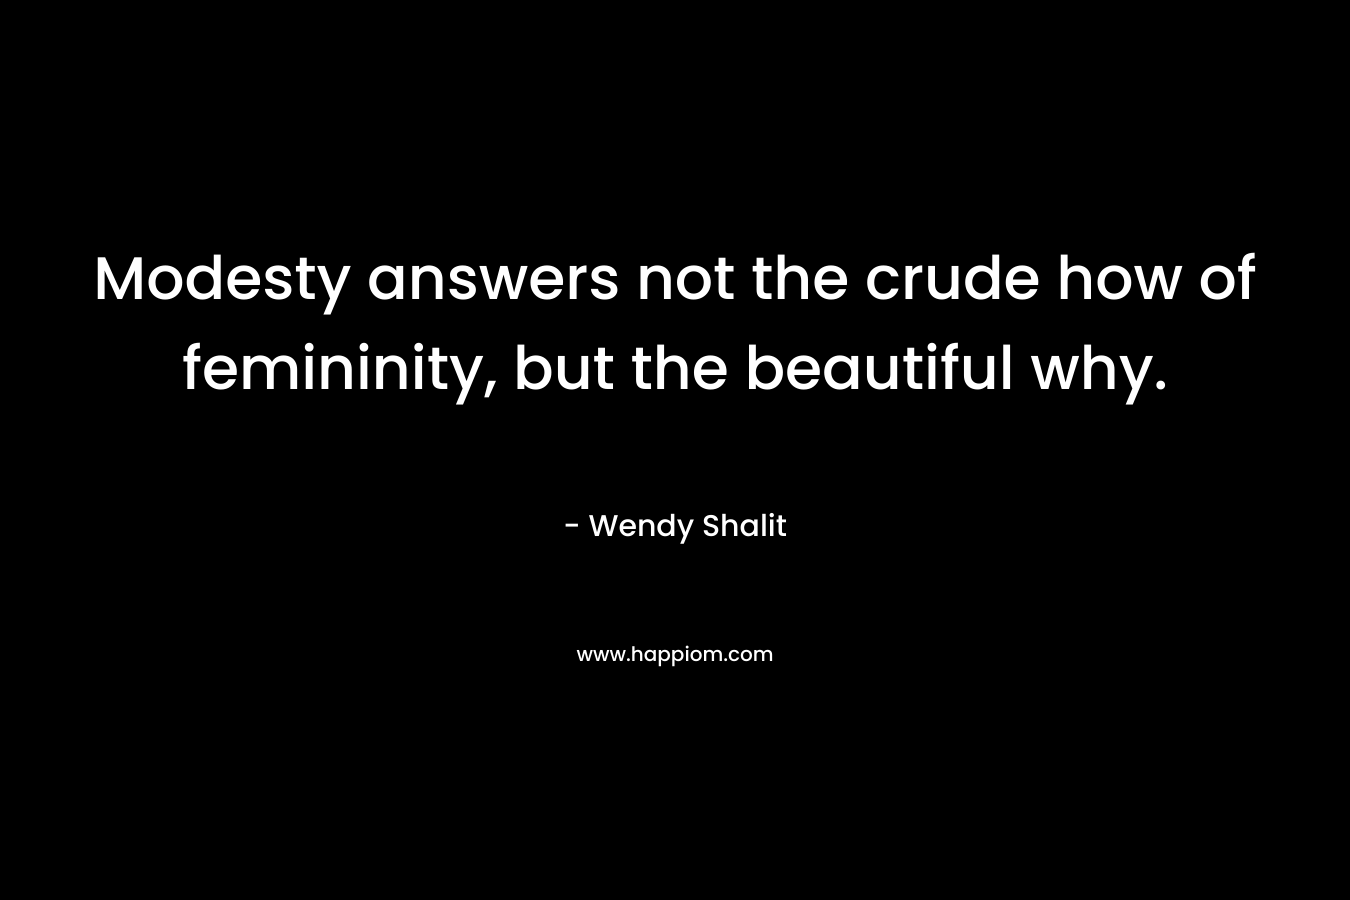 Modesty answers not the crude how of femininity, but the beautiful why. – Wendy Shalit